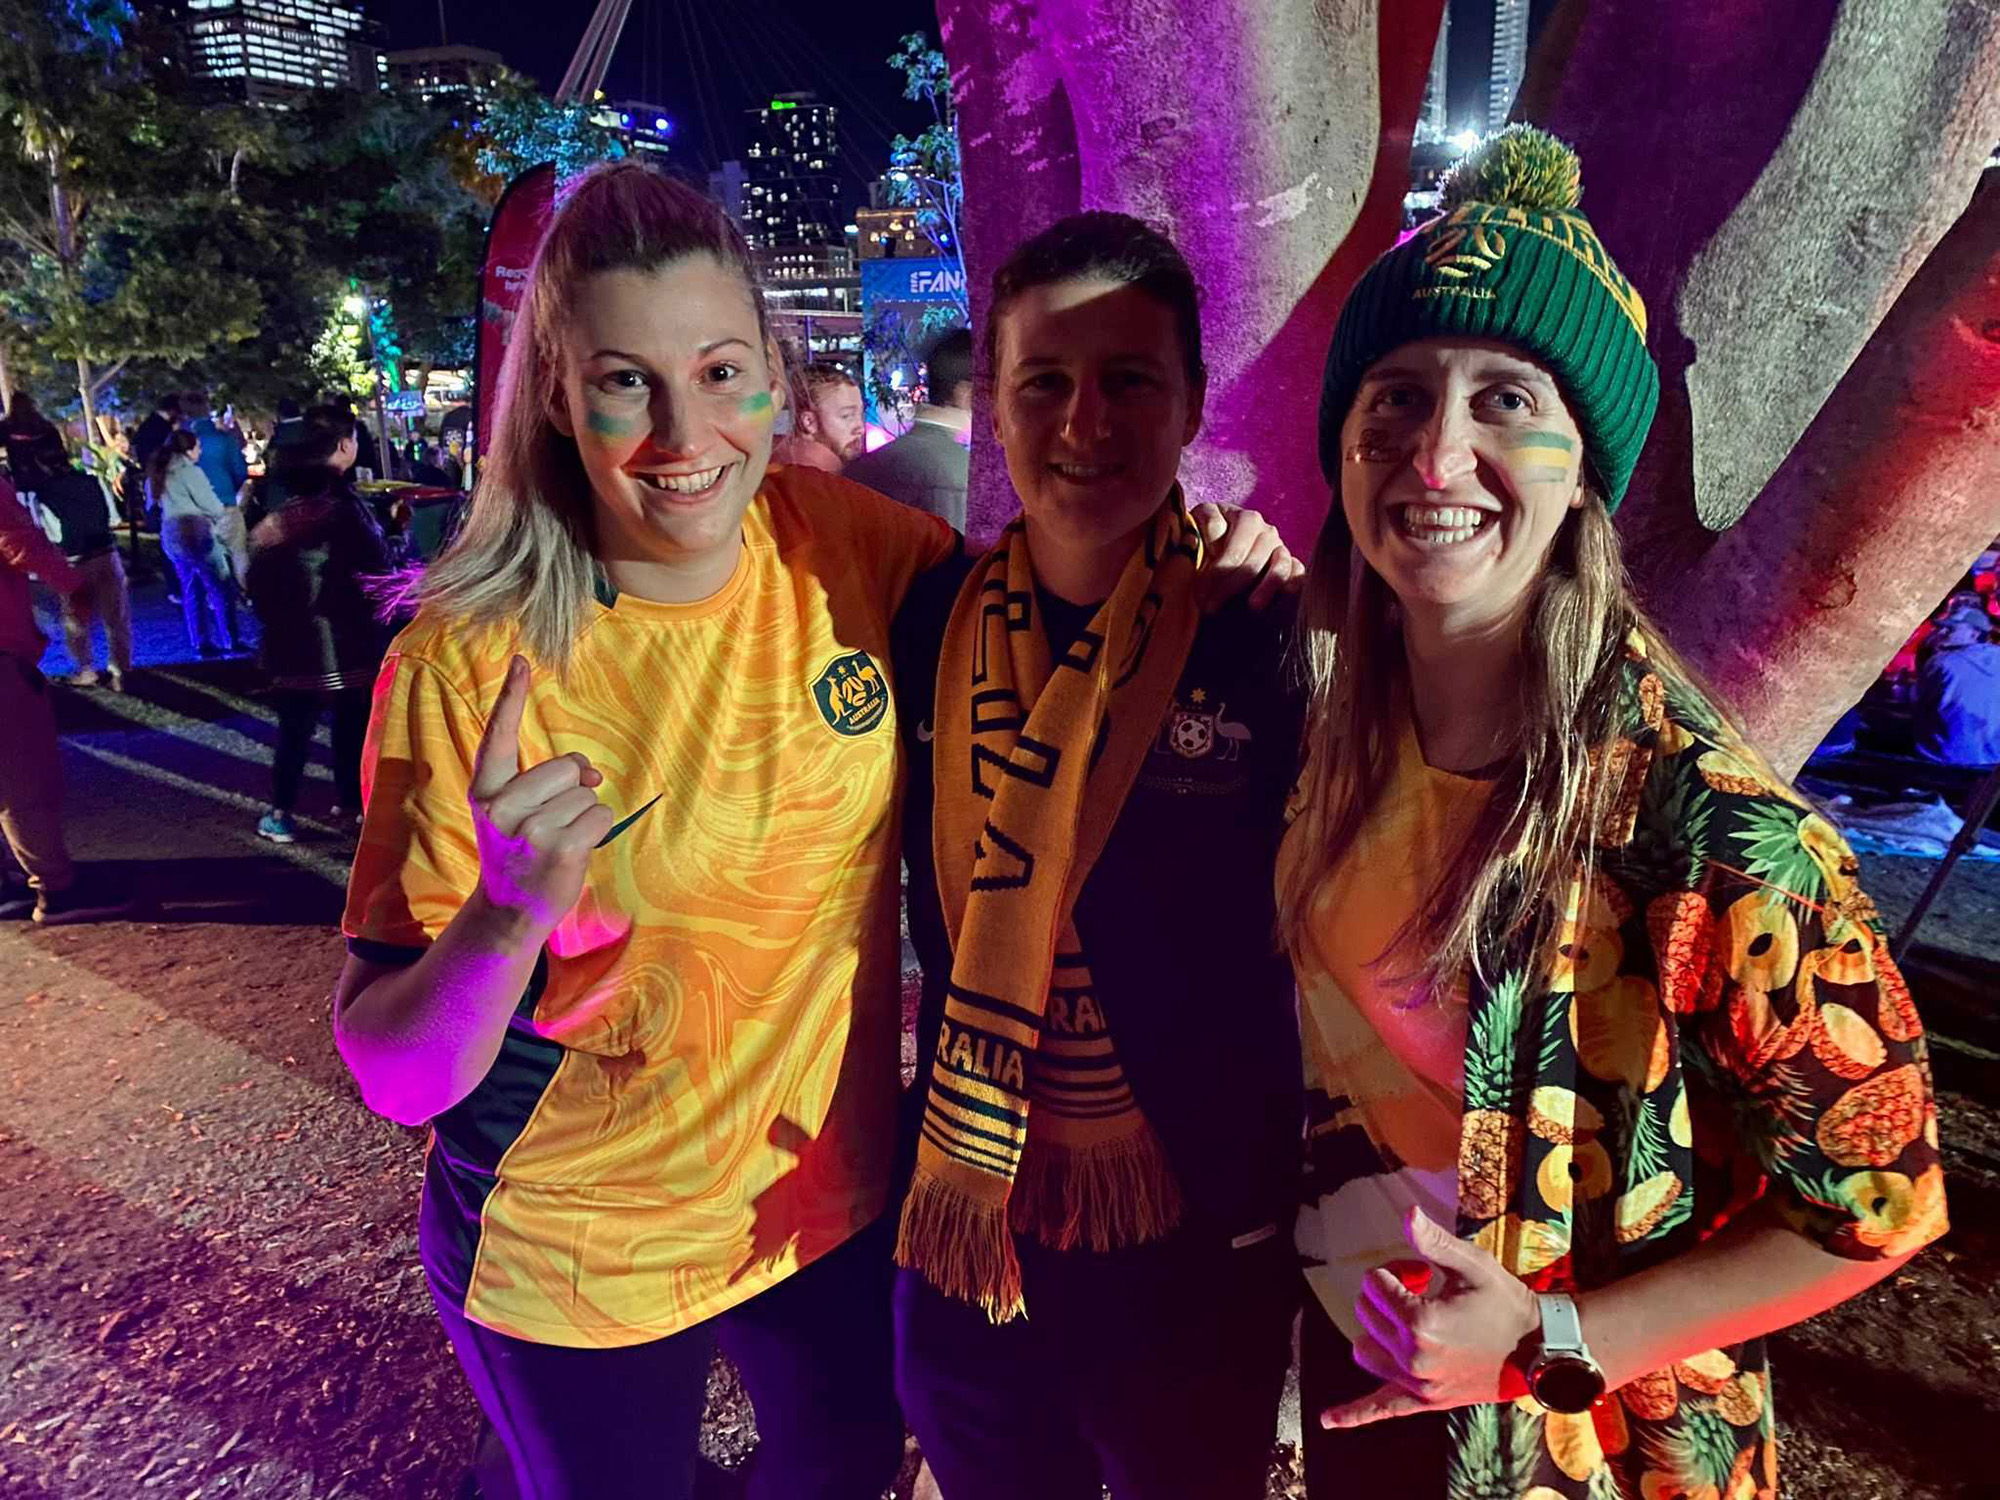 Matildas fan Kate Deegan said Sam Kerr's injury was “heartbreaking!” with her friends adding: “There’s great depth in the team.” Who will they watch now? “Mary Fowler!"